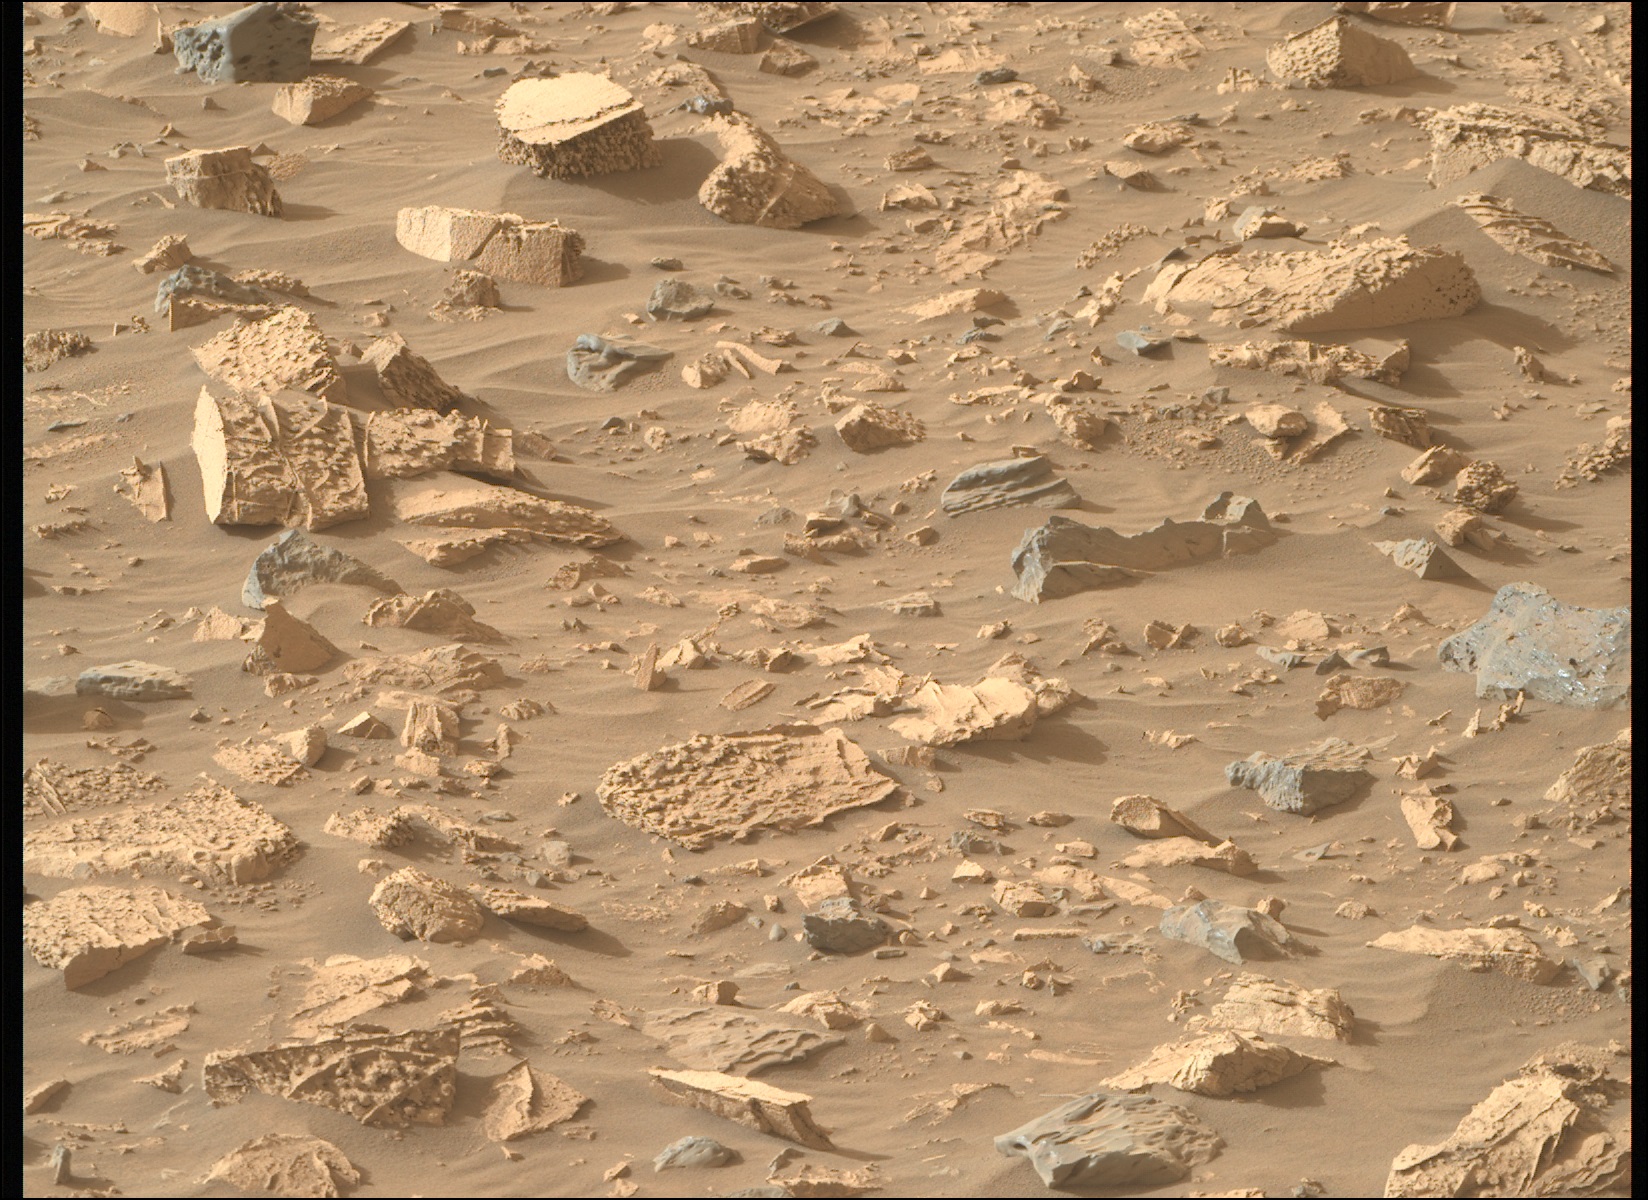 Rocky, pale-orange-colored terrain on Mars. What looks like fine-gran sand is interspersed with many jagged rocks pointing out of the ground; a few of the rocks are gray, not orange.